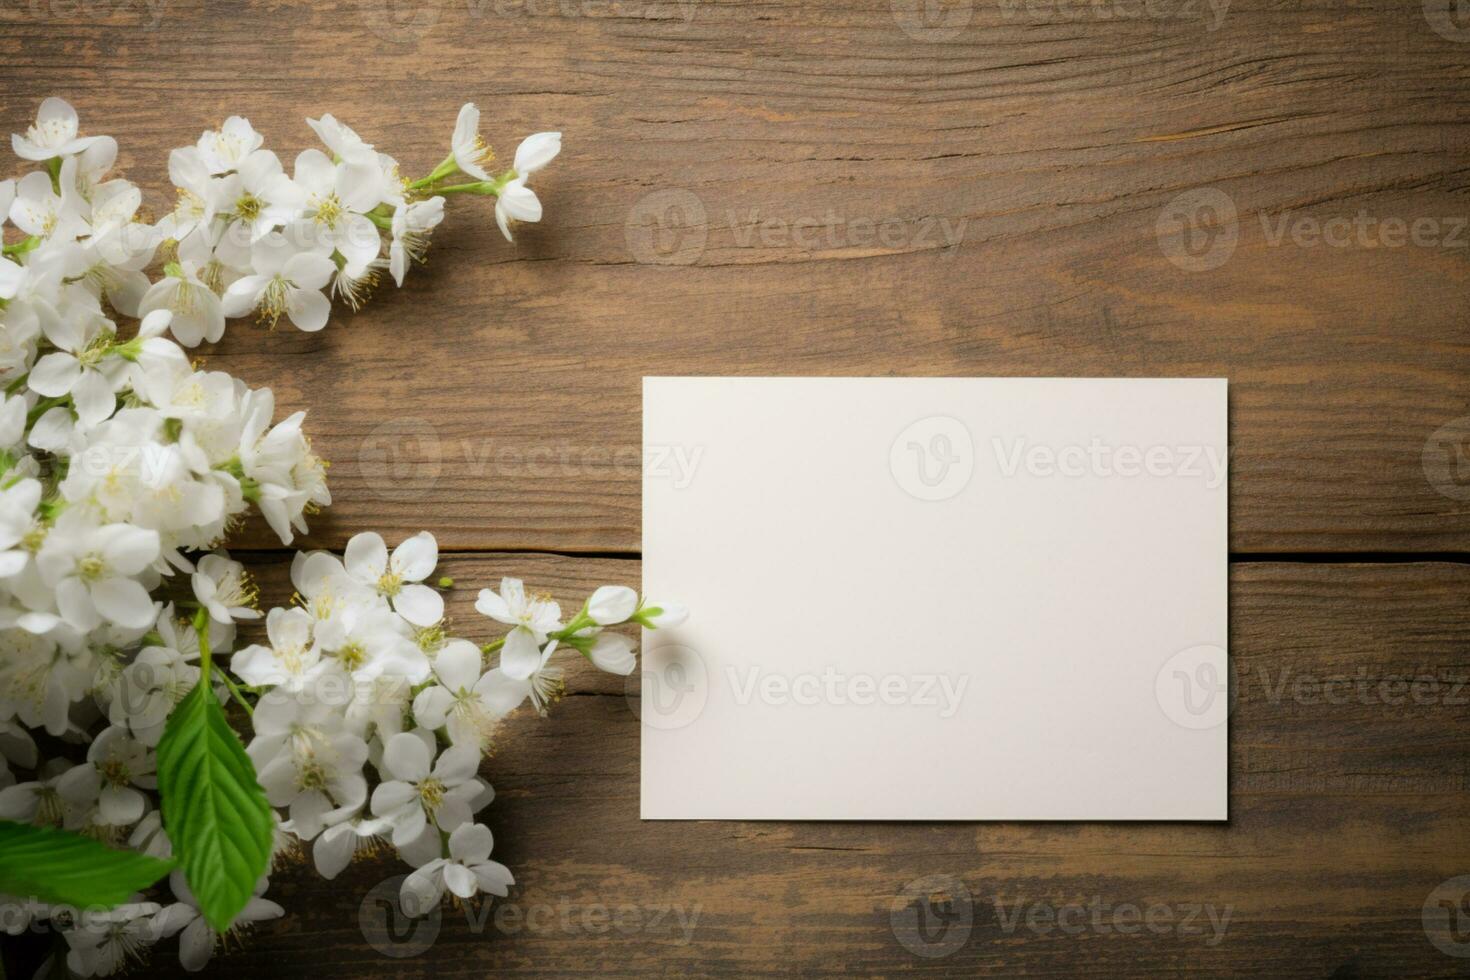 Blank paper and flowers on country rustic wooden table background for printable art, paper, stationery and greeting card mockup photo